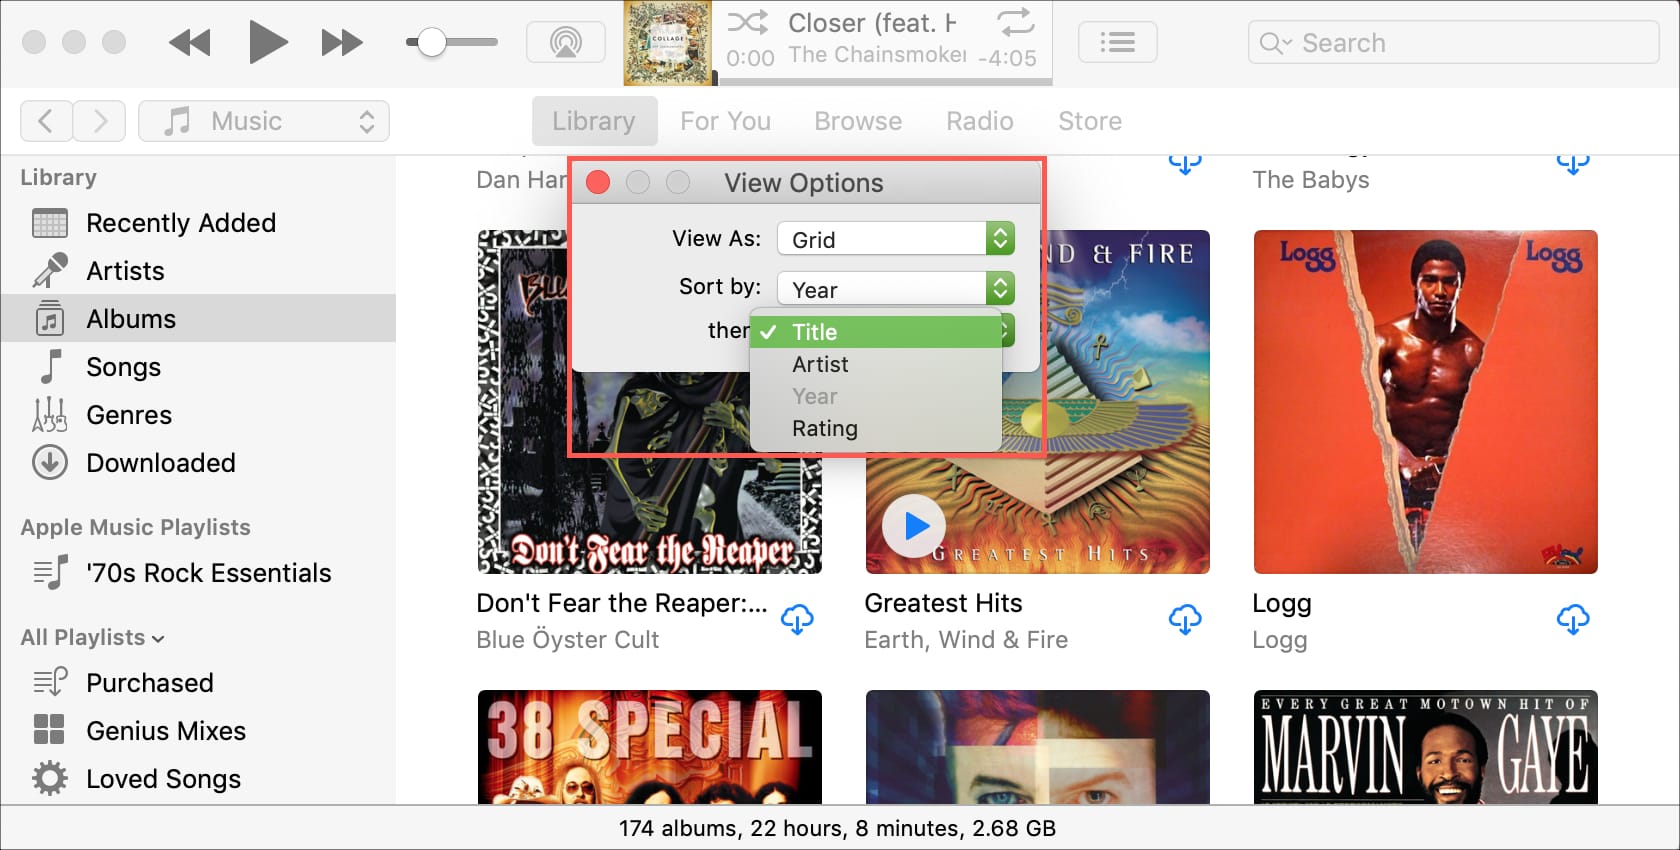 View Options for Albums in Music Library